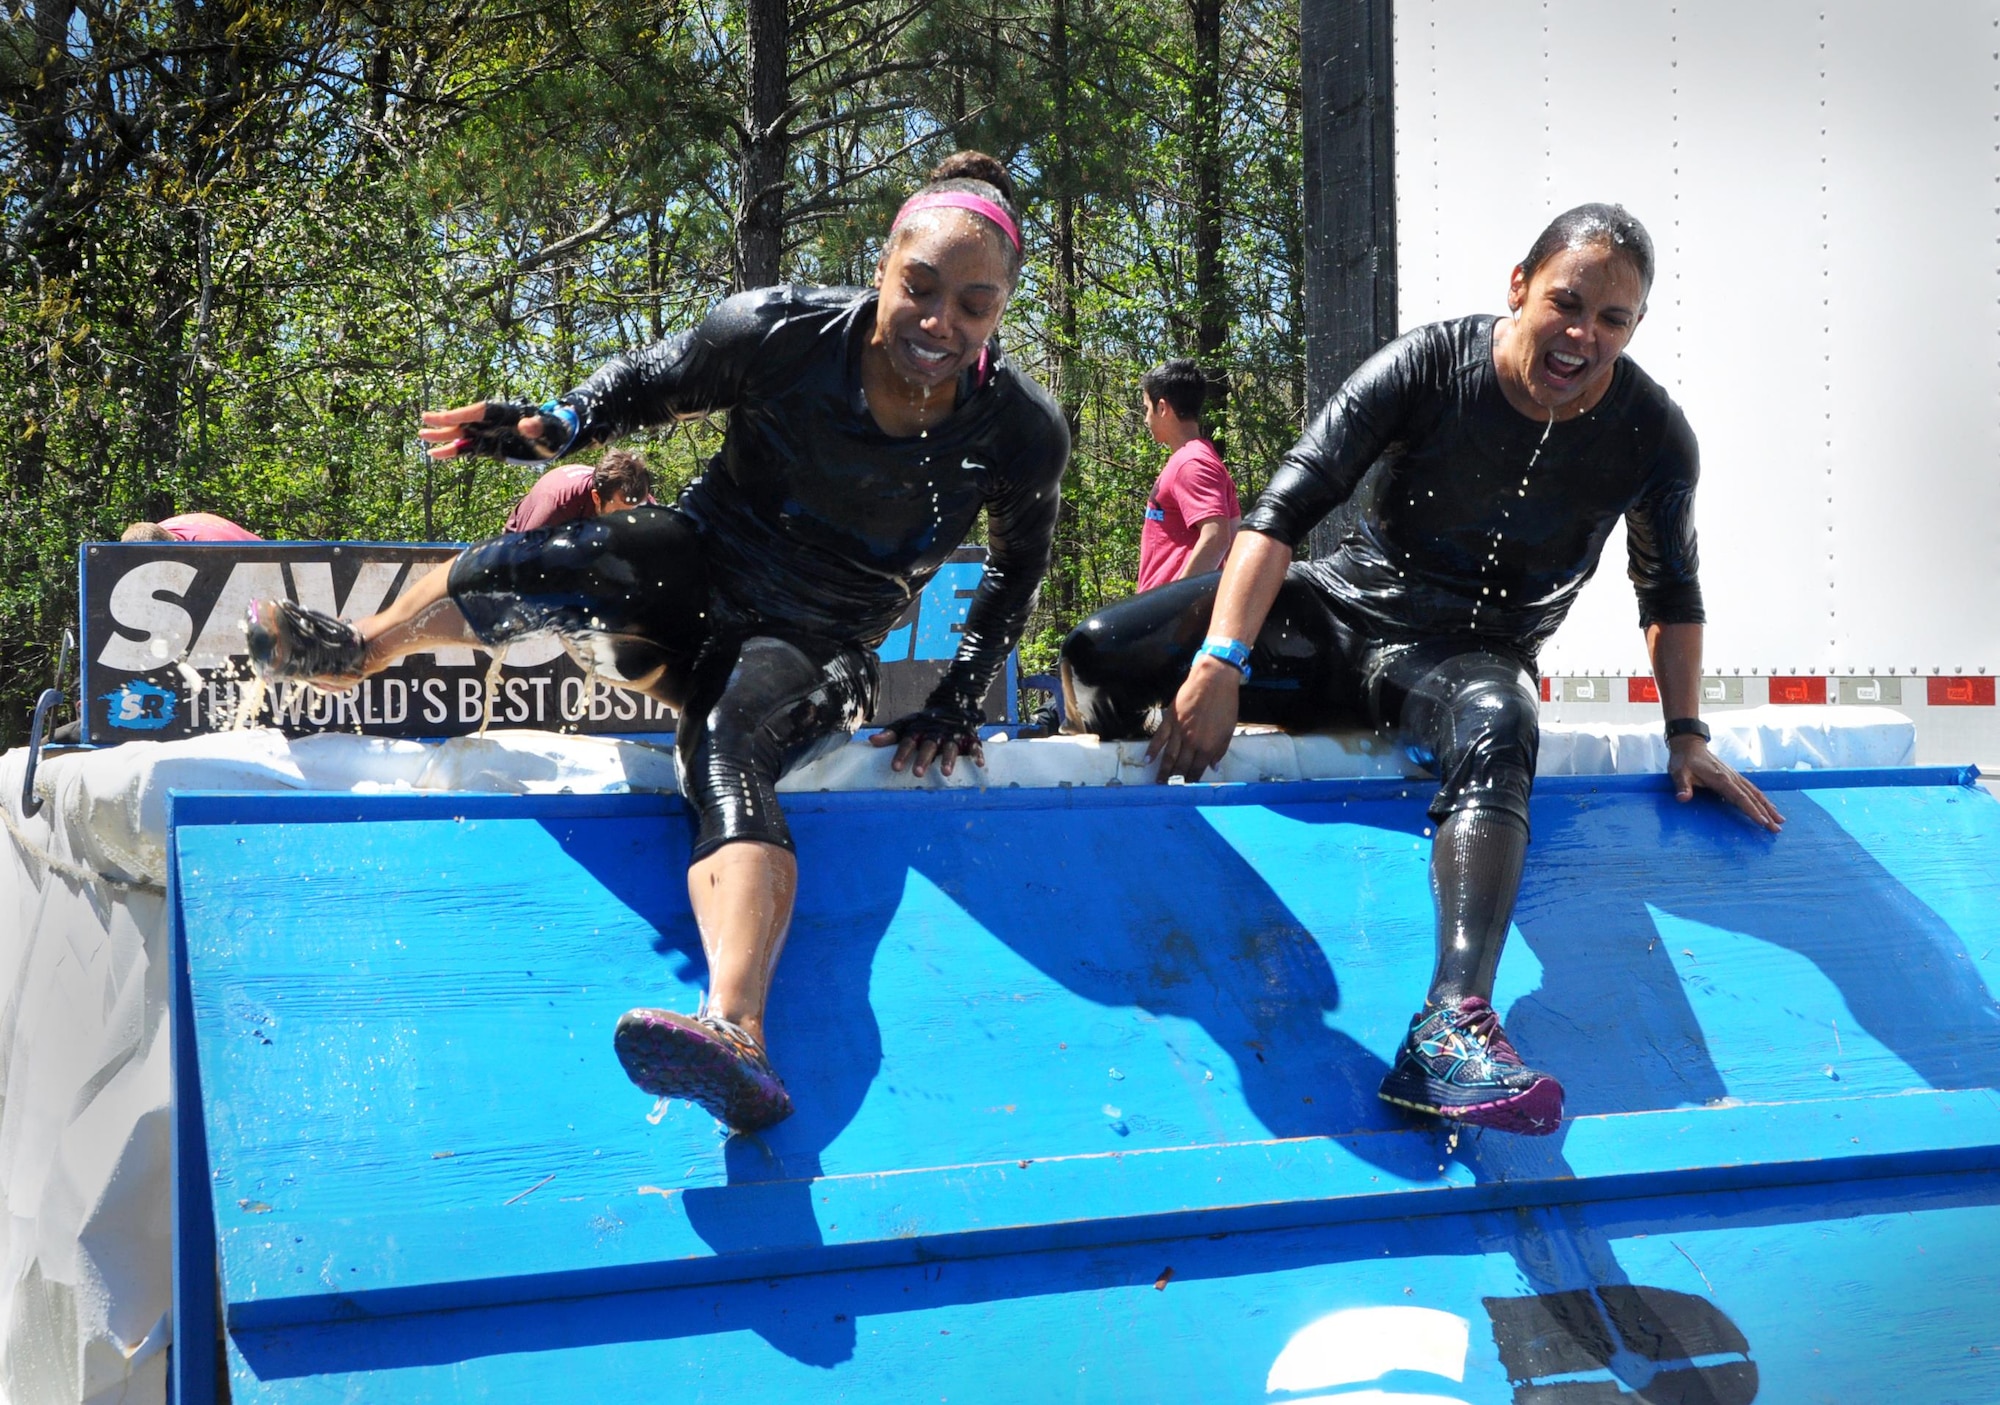 Major Stephanie Hahn, 94th Airlift Wing executive officer, and Capt. Natalie Campos, 22nd Air Force executive officer, appear almost choreographed as they emerge simultaneously from the ice pool during the Savage Race on April 9, 2016 in Dallas, Georgia. These members of Team Dobbins moved swiftly through every obstacle with cheerful faces throughout.  (U.S. Air Force photo by Senior Airman Lauren Douglas)